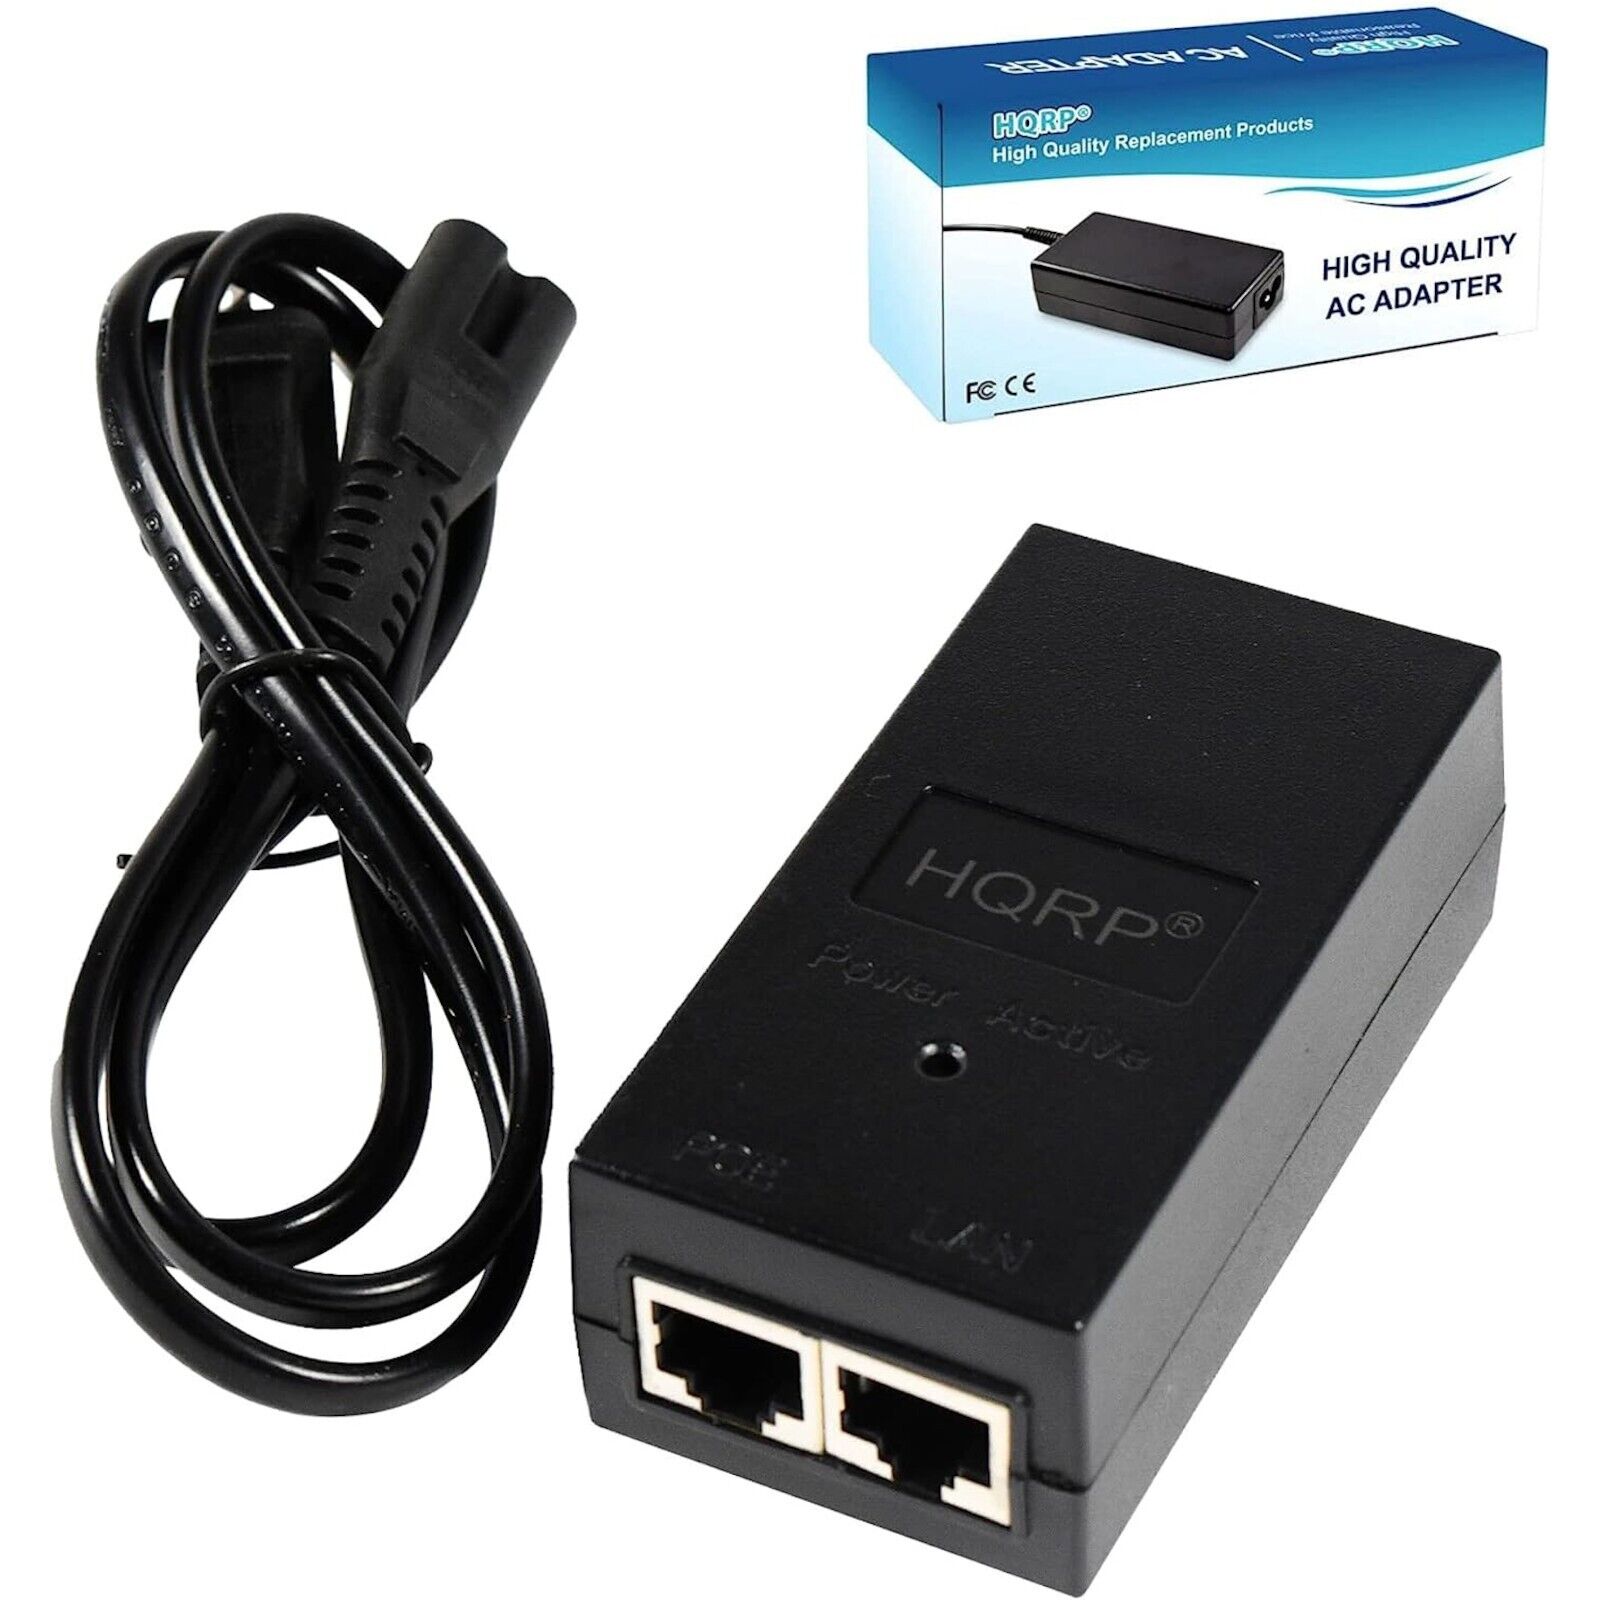 55V 30W POE/Power Over Ethernet Injector 10/100/1000Mbps IEEE802.3AT Standard